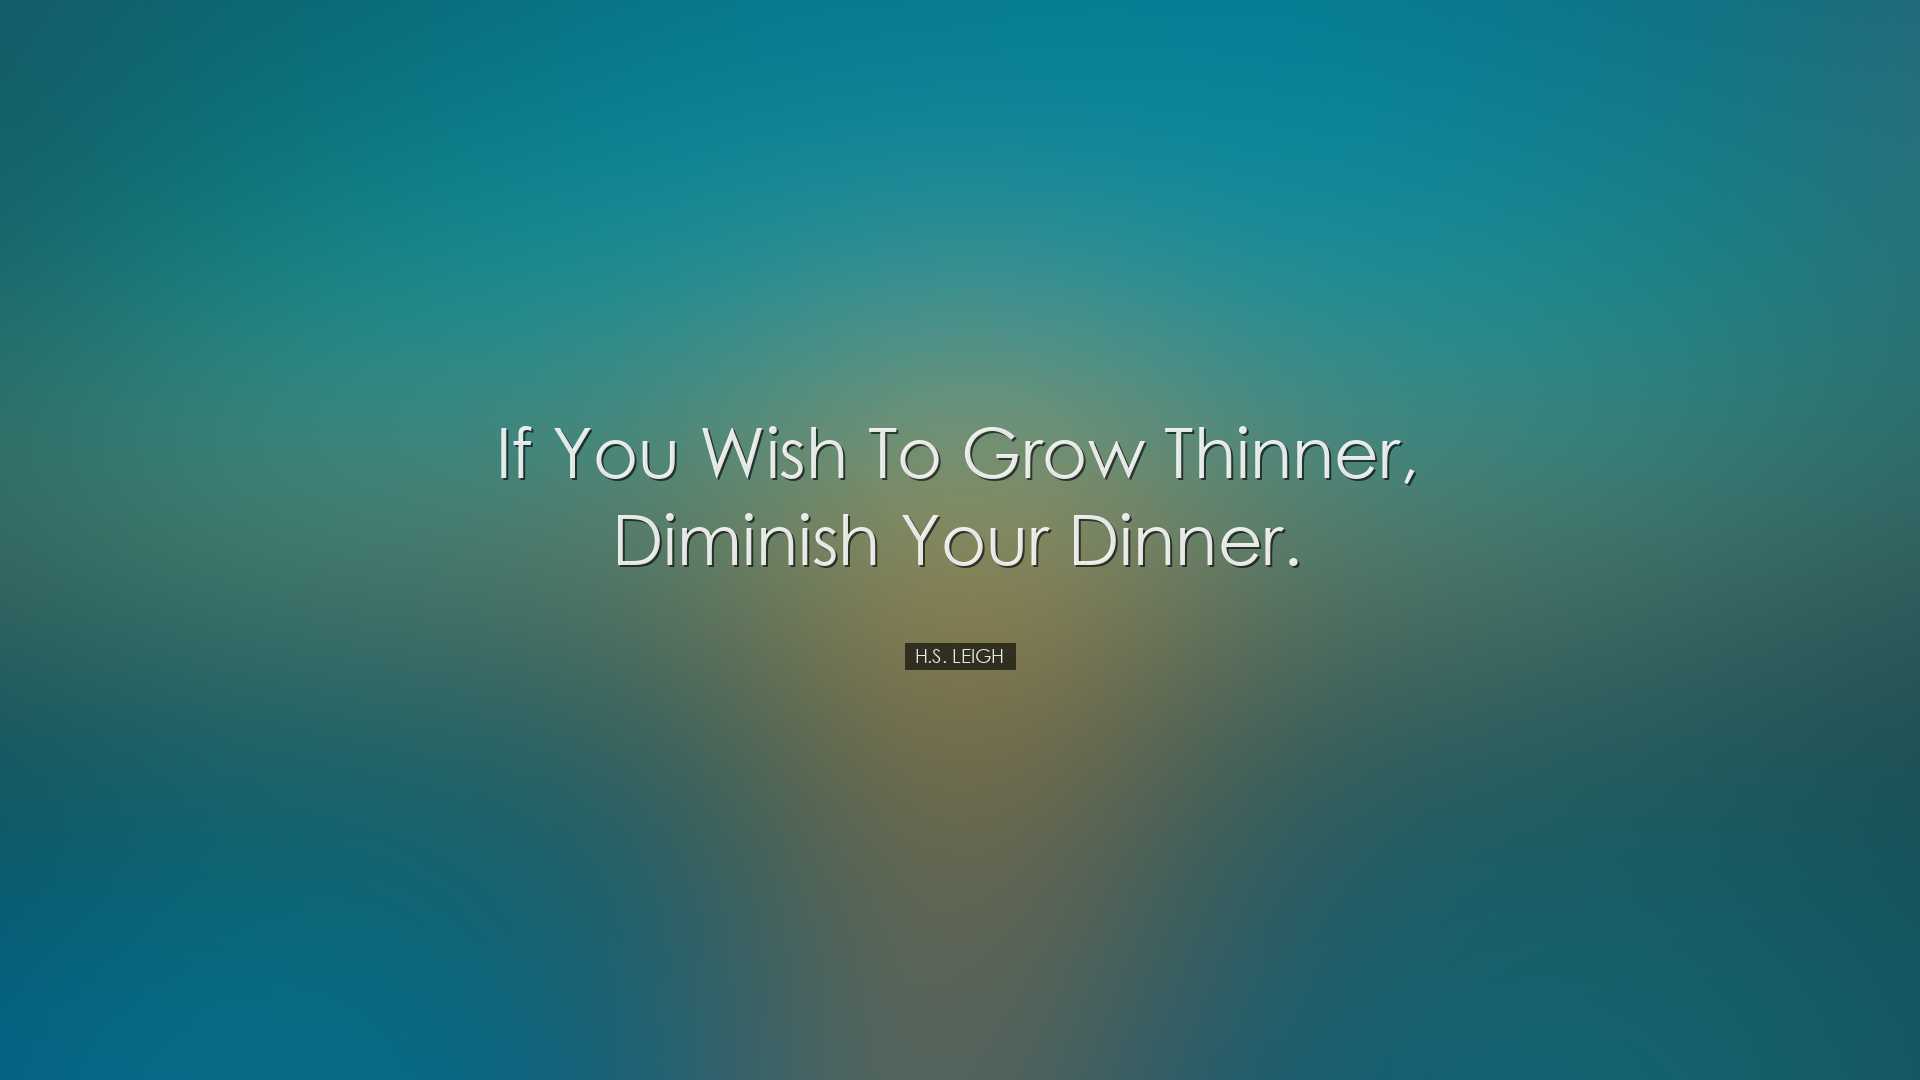 If you wish to grow thinner, diminish your dinner. - H.S. Leigh